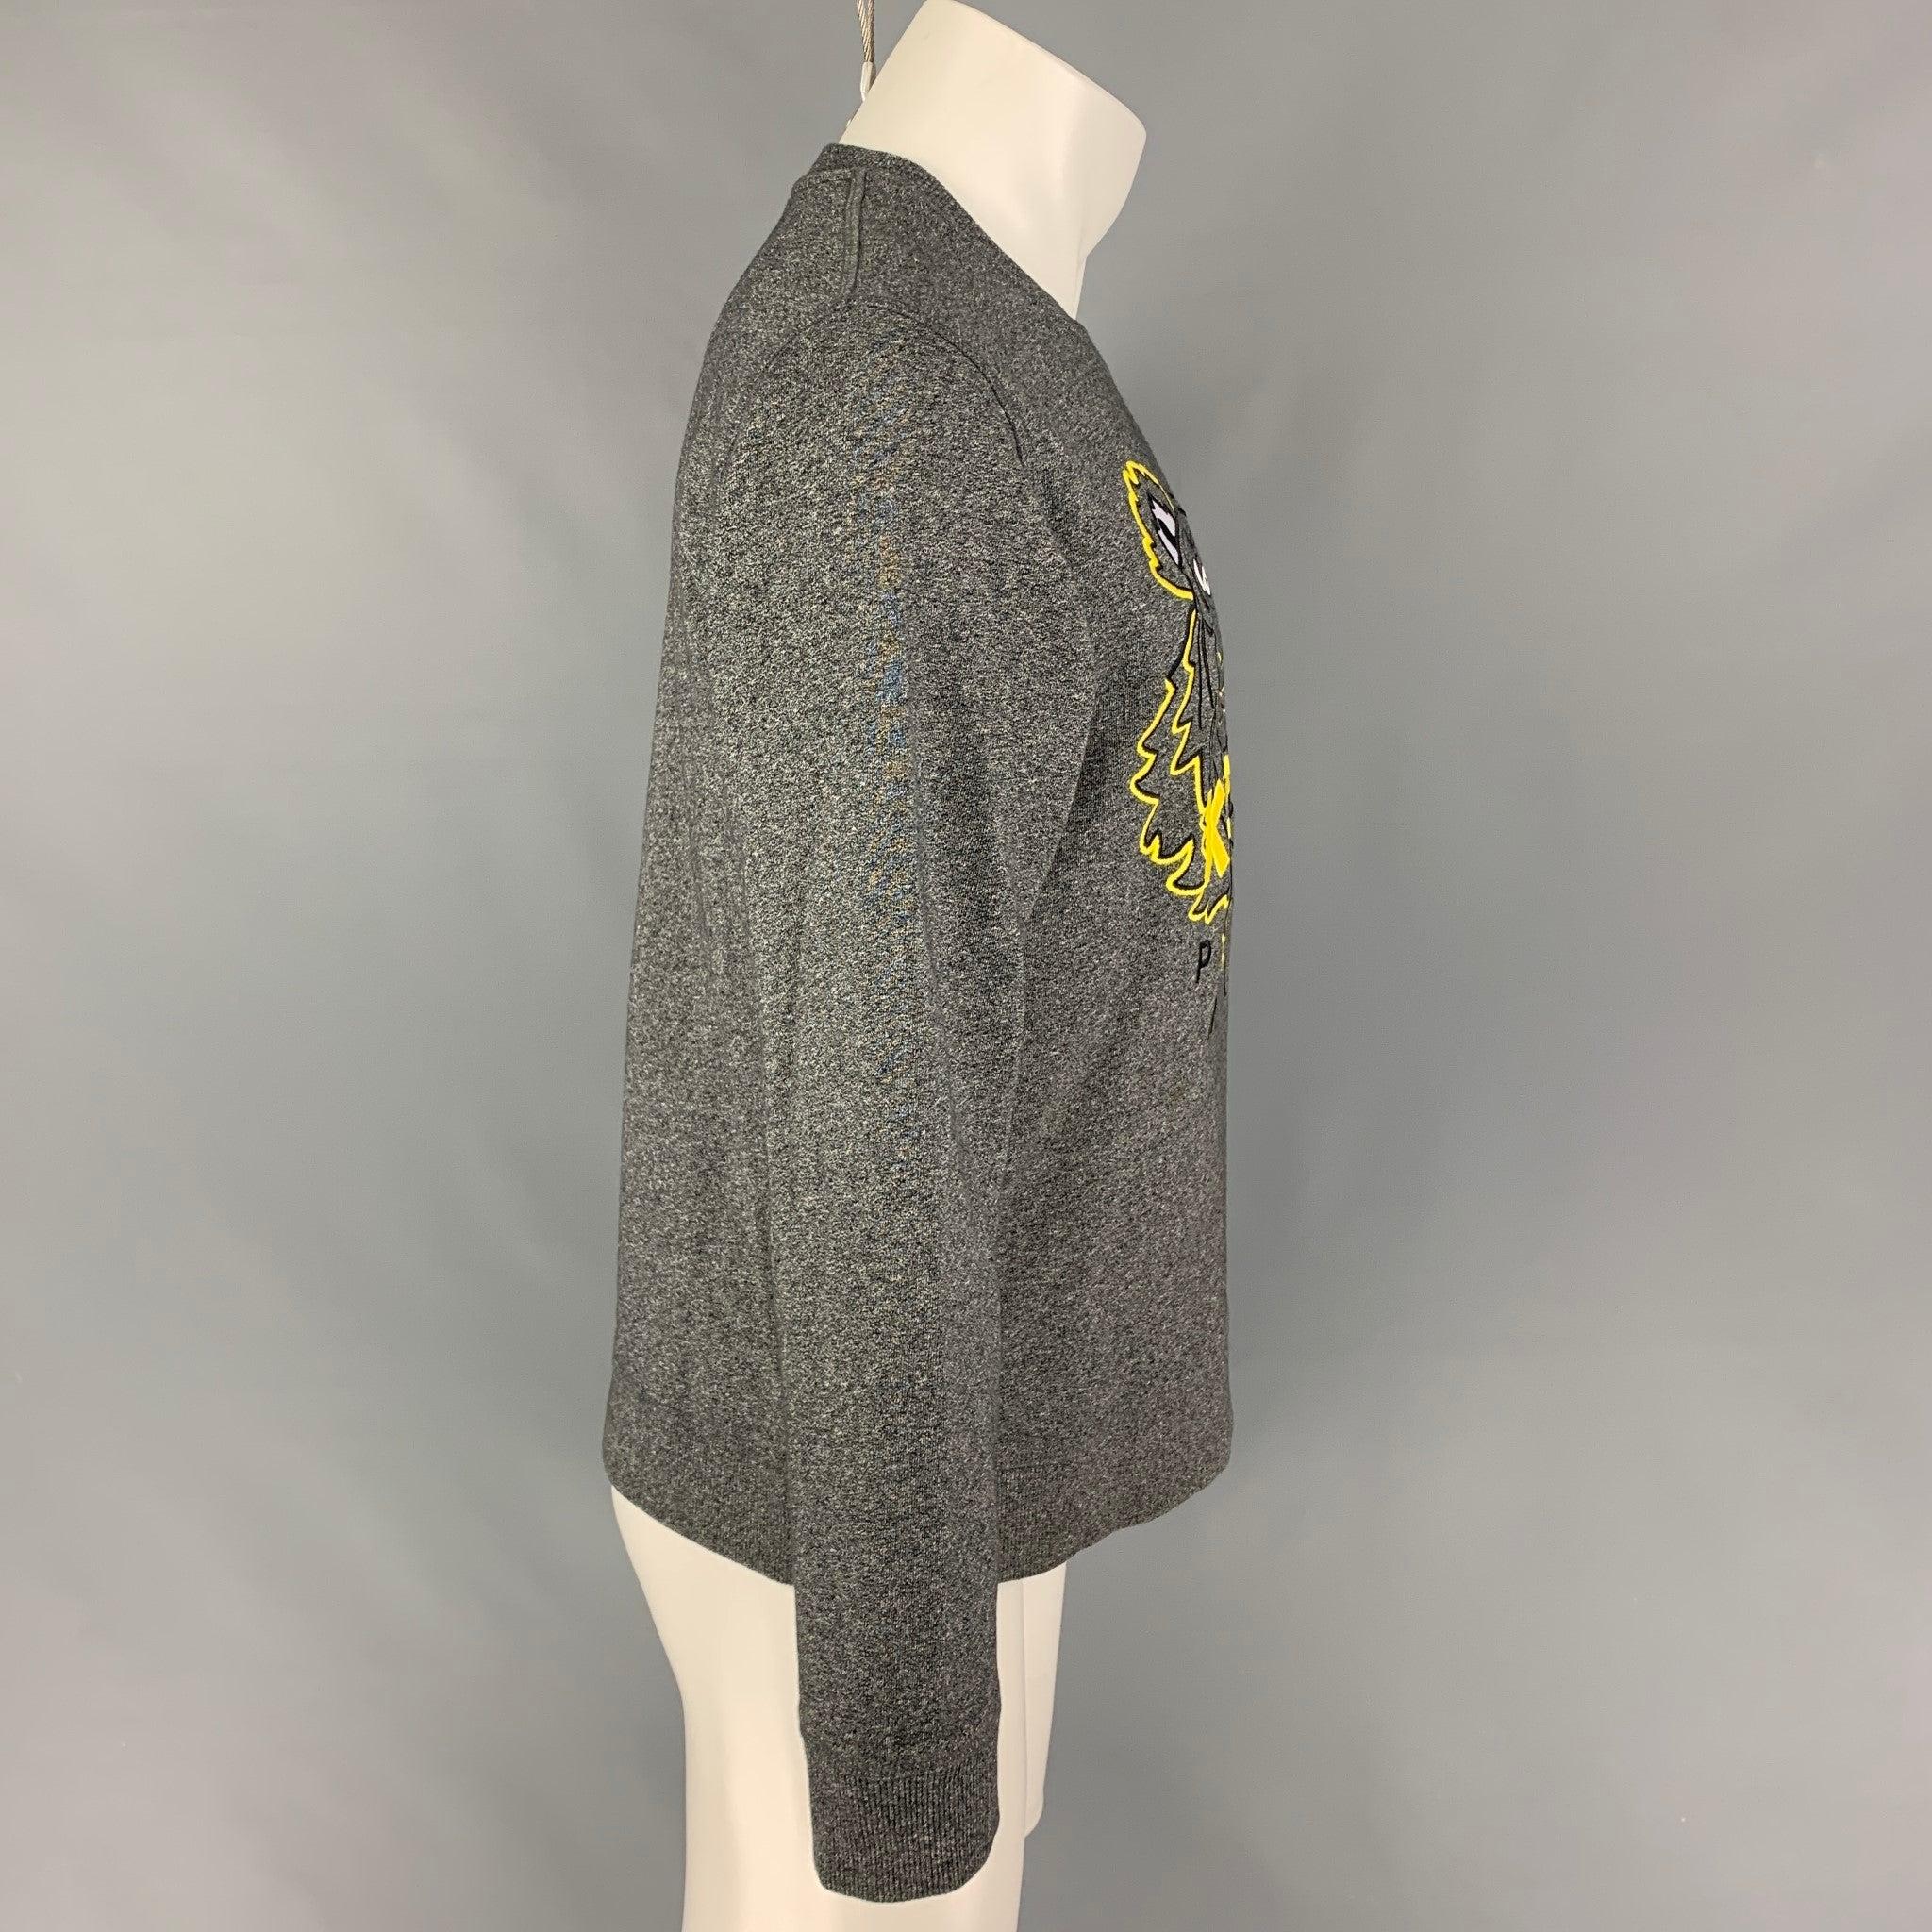 KENZO pullover comes in a grey & yellow cotton with a embroidered tiger design featuring a crew-neck. Made in Portugal.Very Good Pre-Owned Condition. 

Marked:   M 

Measurements: 
 
Shoulder: 18 inches Chest: 40 inches Sleeve: 26 inches Length: 25